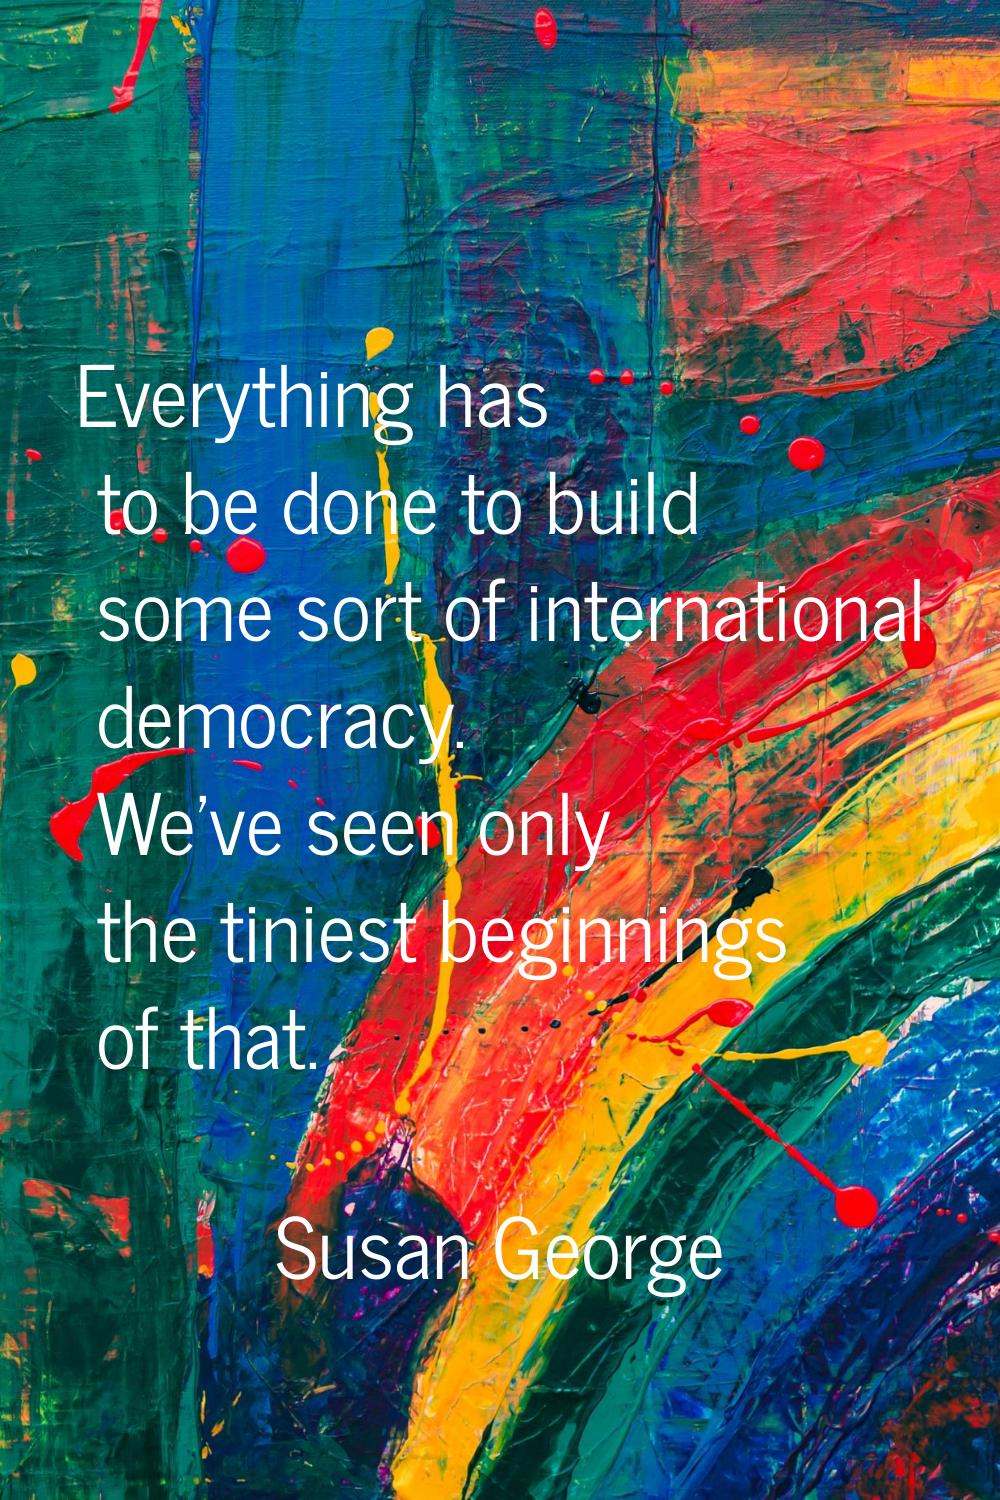 Everything has to be done to build some sort of international democracy. We've seen only the tinies